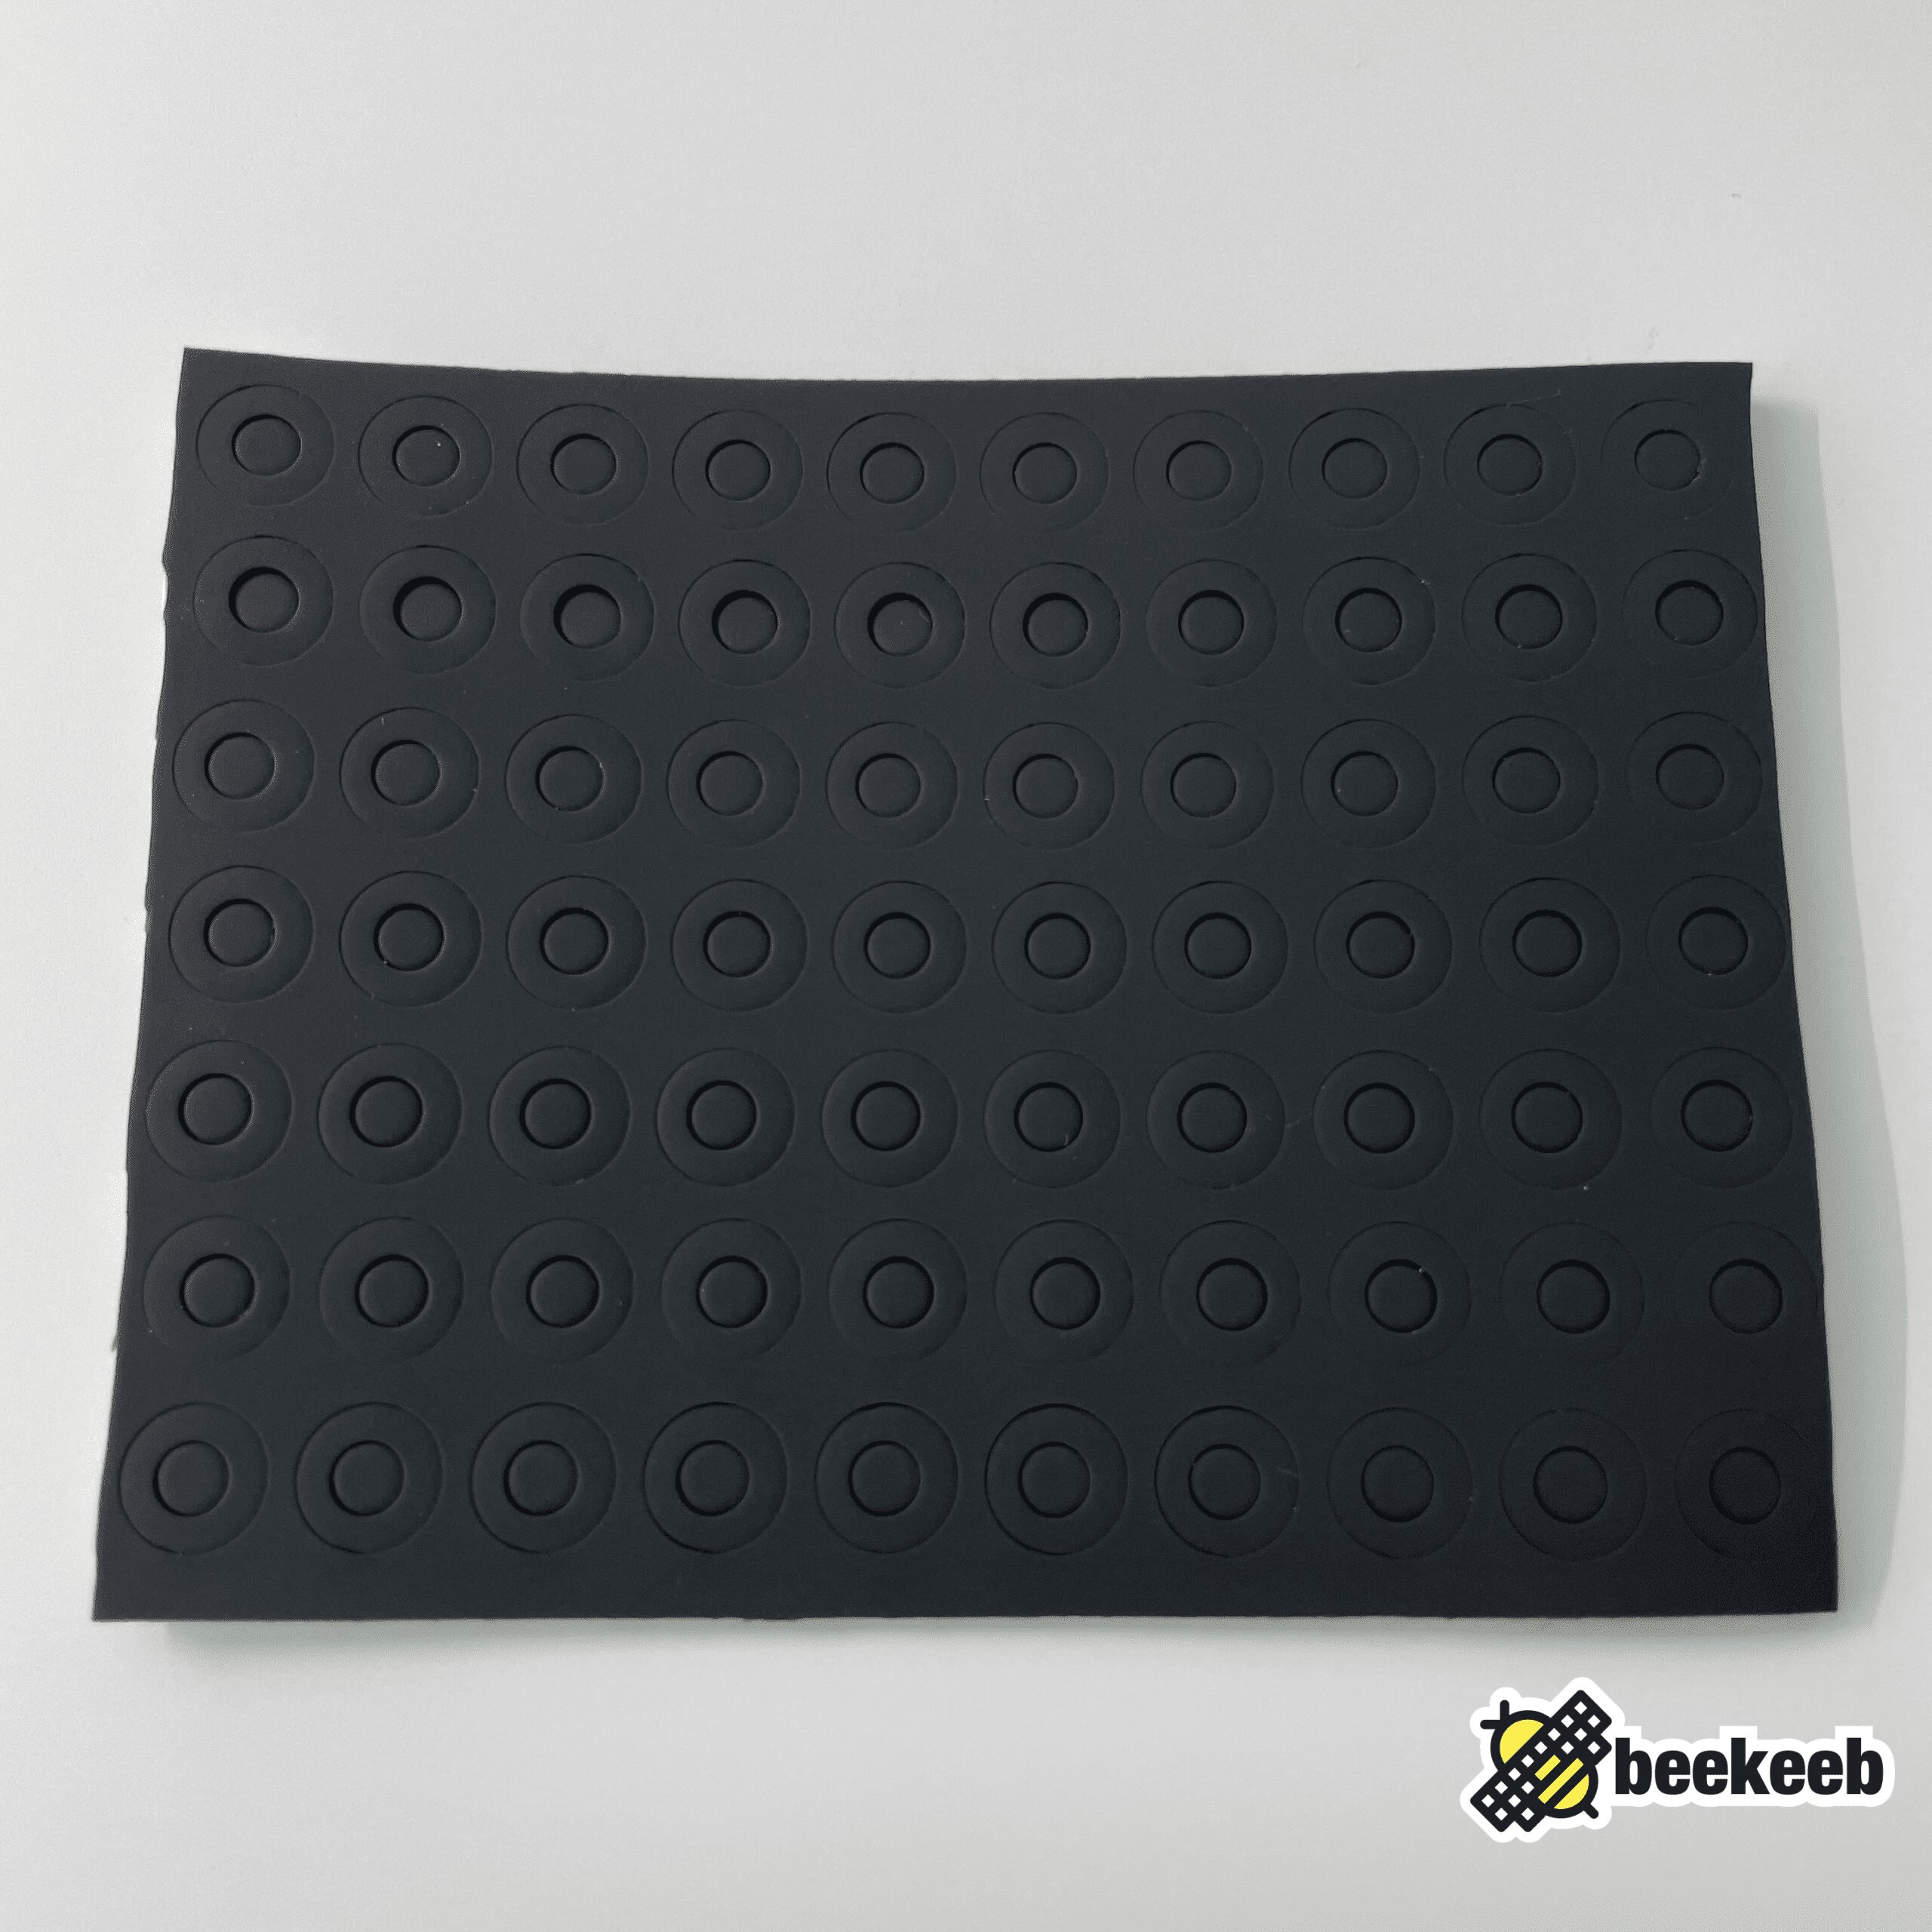 Donut0804 Custom Made Donut Silicone Rubber for Gasket Mount, Rubber Feet Pads (O-rings / Washers like)